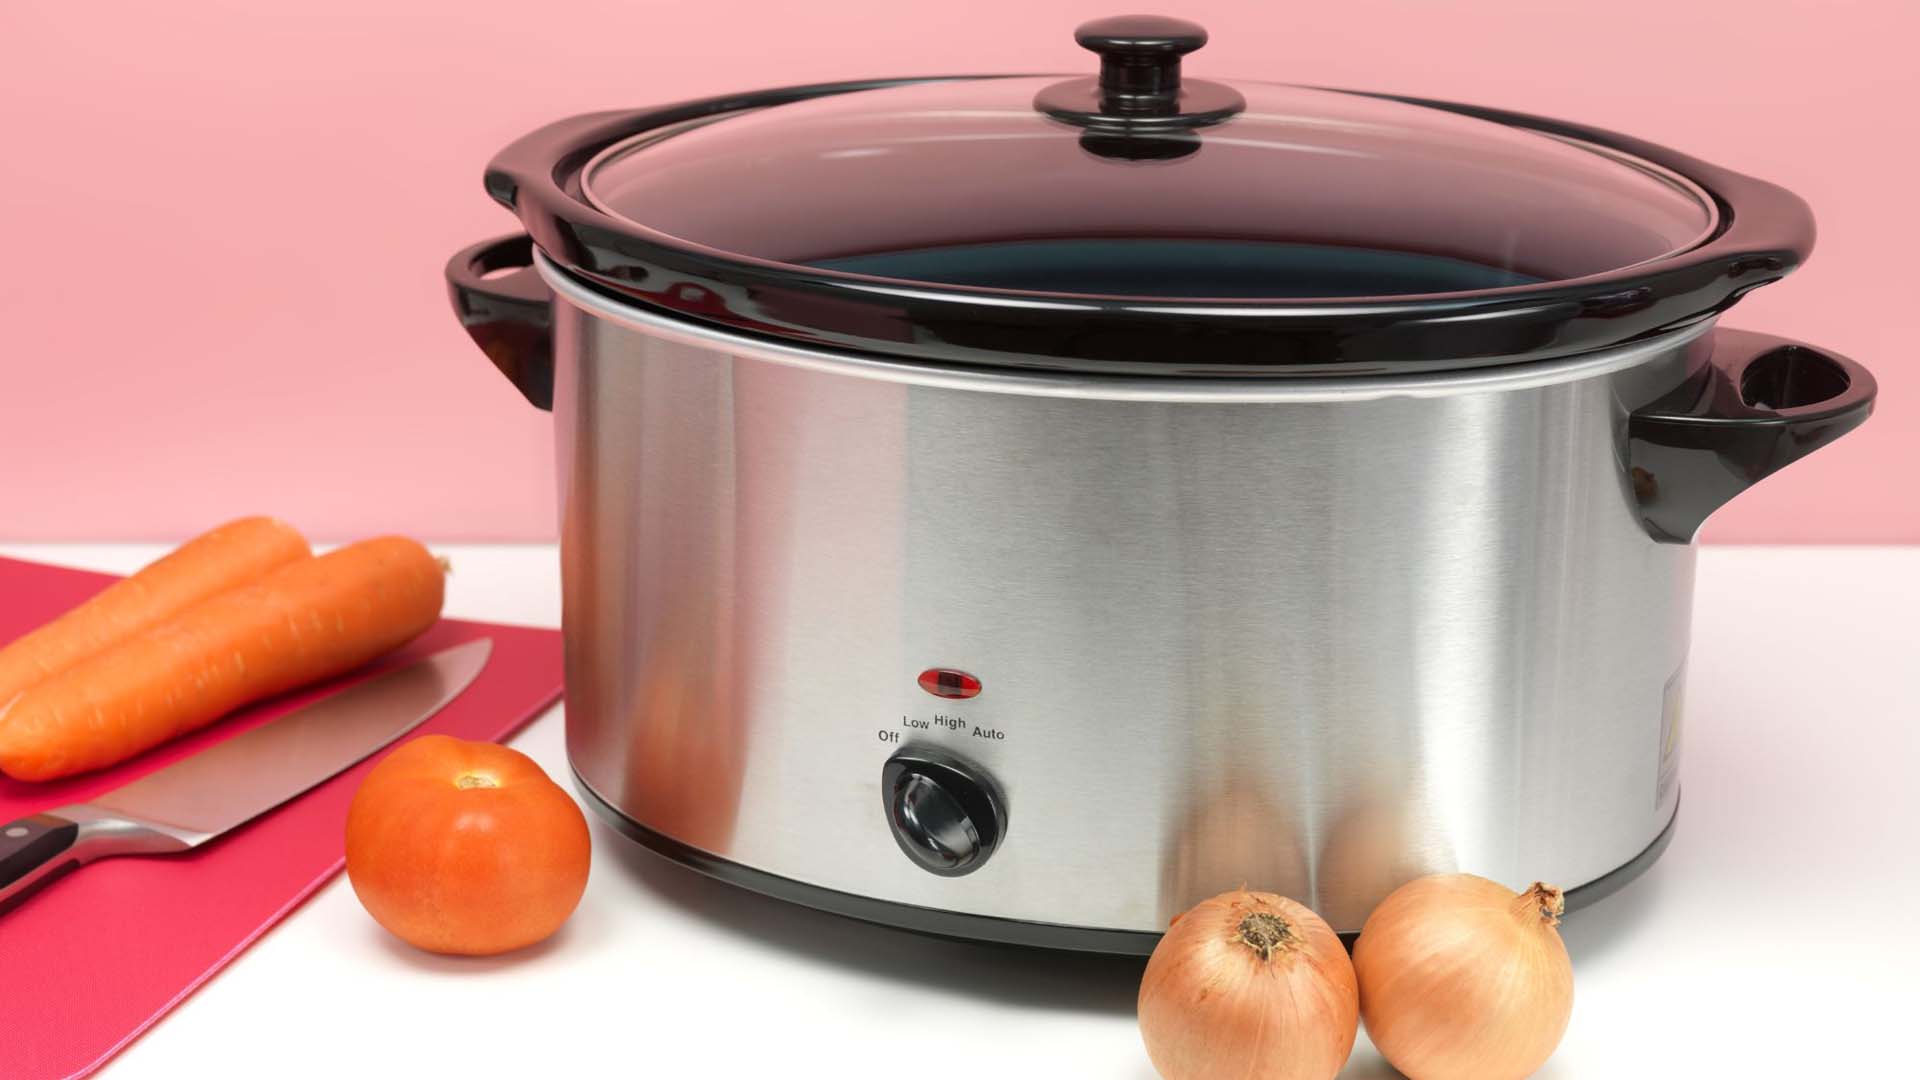 Food being prepared next to a slow cooker